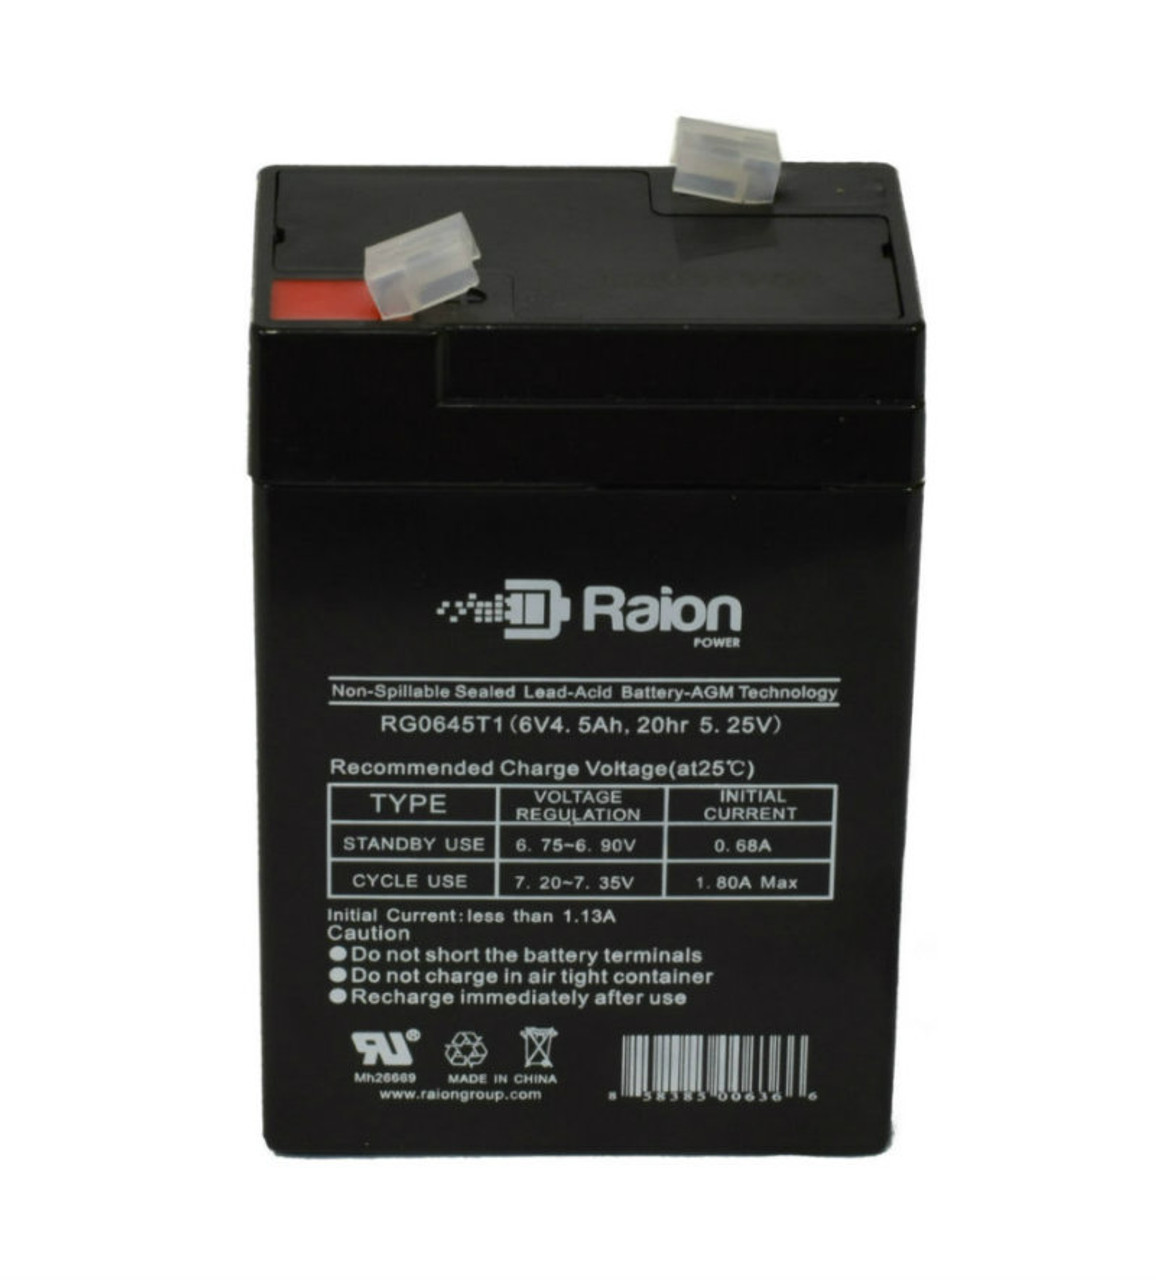 Raion Power RG0645T1 Replacement Battery Cartridge for Flying Power NS6-4.5